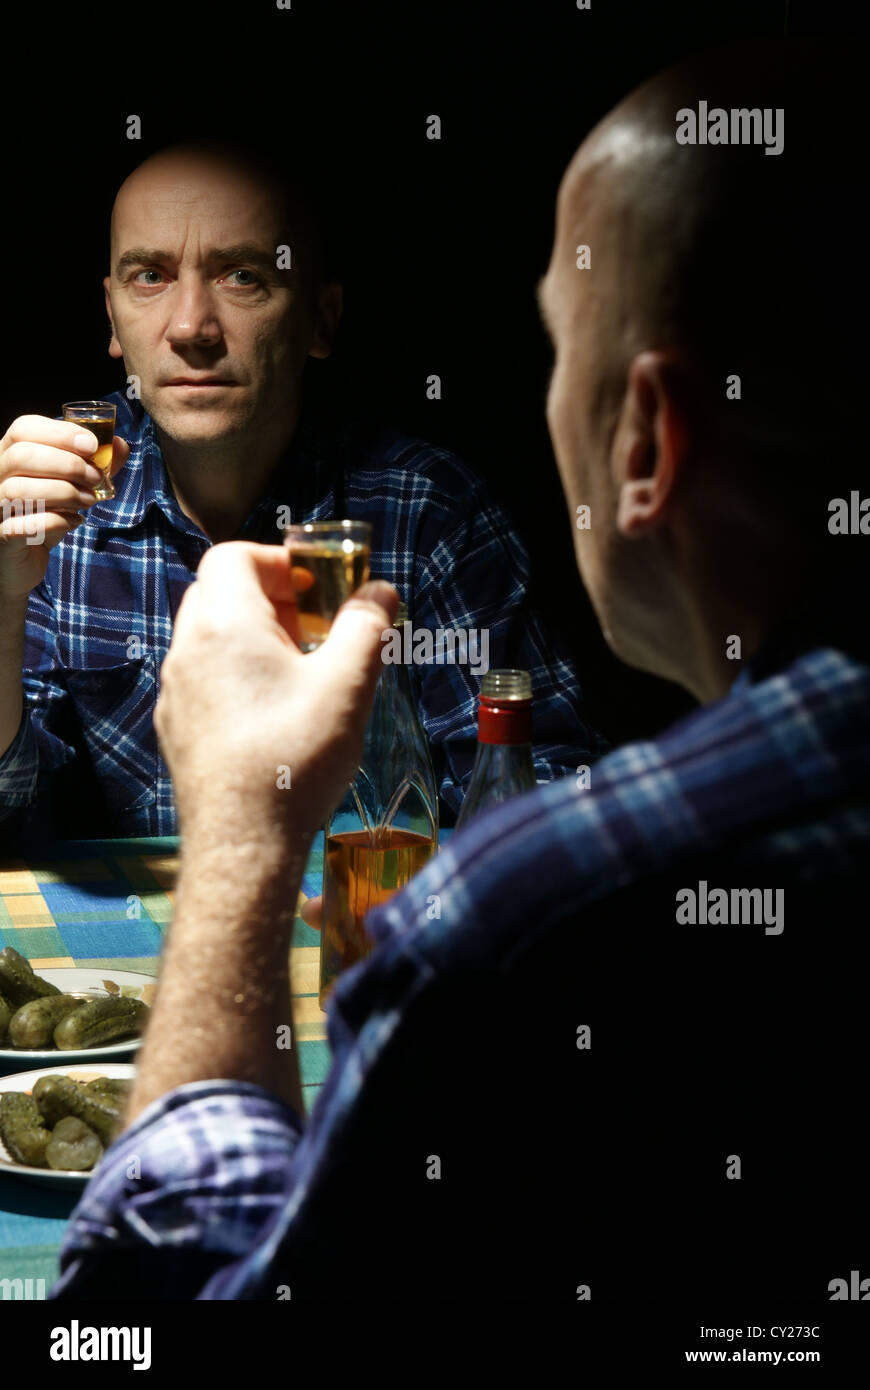 lonely drinking man with reflection in mirror Stock Photo